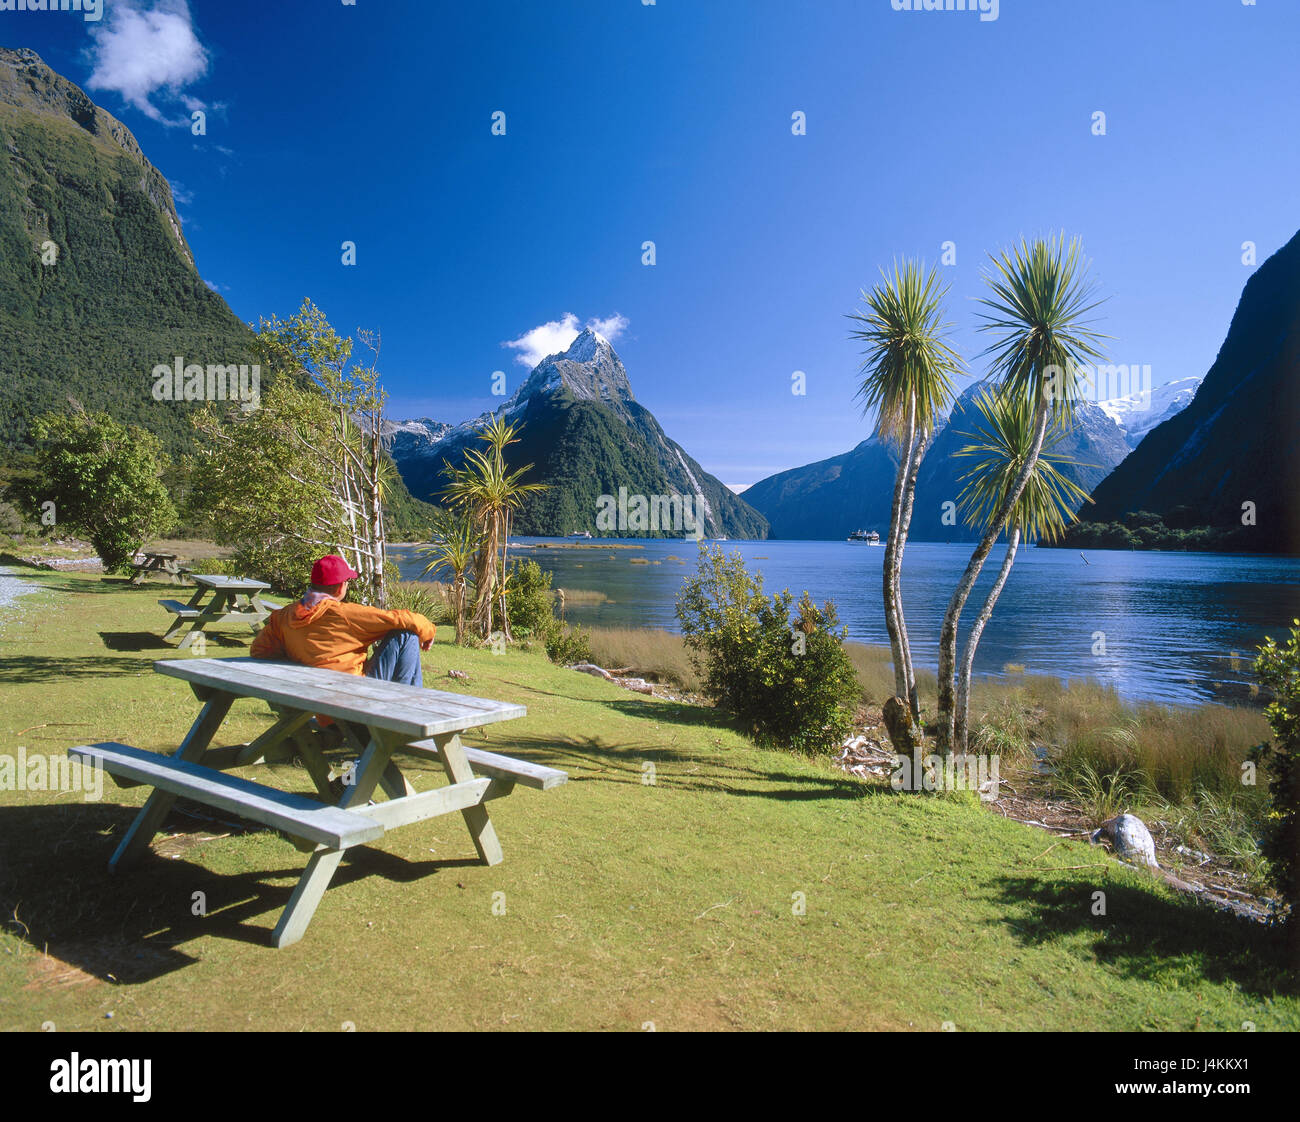 New Zealand, south island, fjord country national park, Mitre Peak, shore, wooden bank, tourist, back view New Zealand, mountain landscape, mountain, mountains, coast, fjord, lakeside, park-bench, man, détente, rest, view, enjoy, take it easy, destination, place of interest, nature rest, silence, Idyll Stock Photo